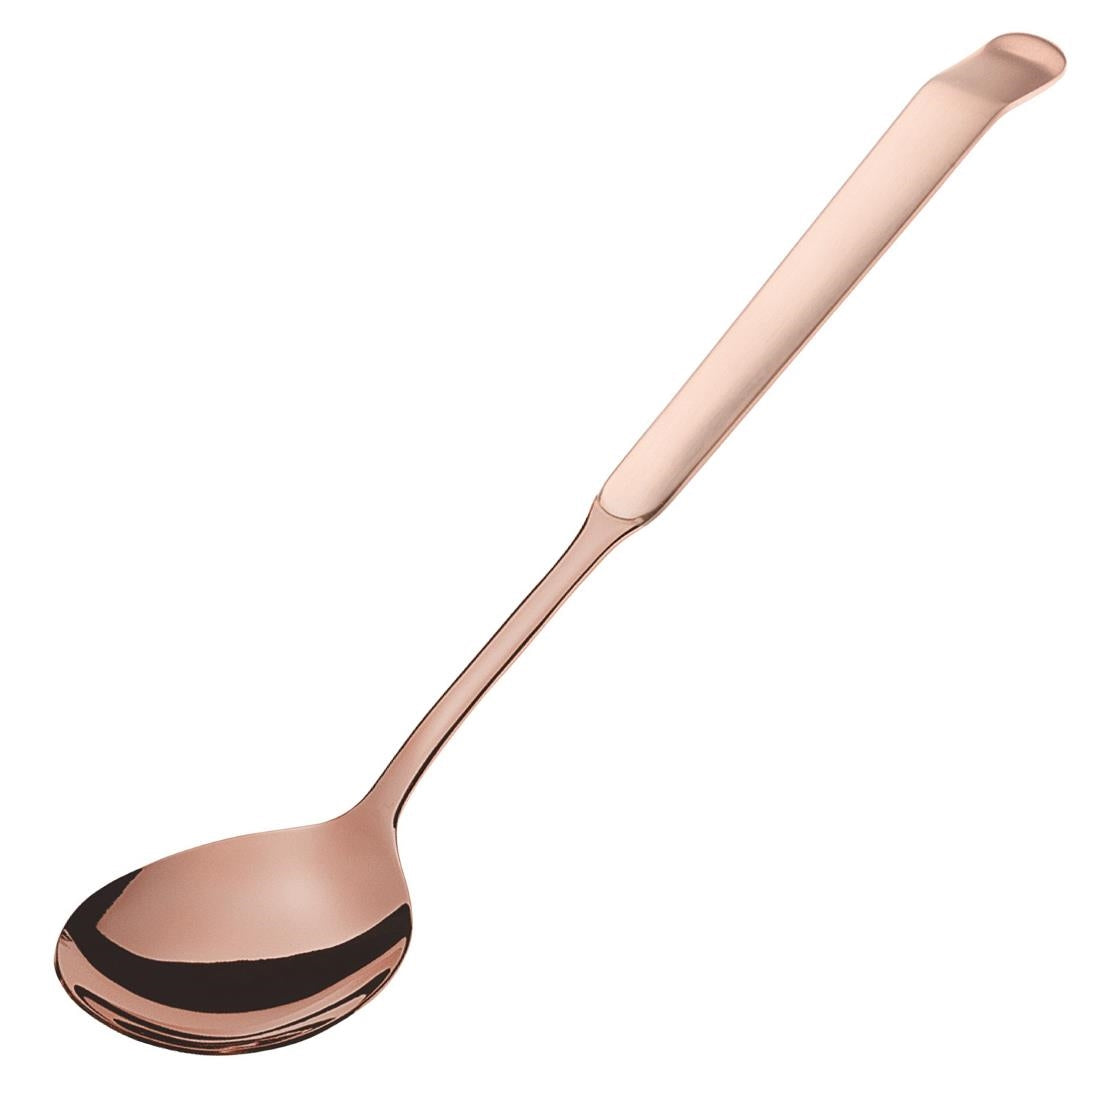 DX652 Amefa Buffet Small Salad Spoon Copper (Pack of 6)